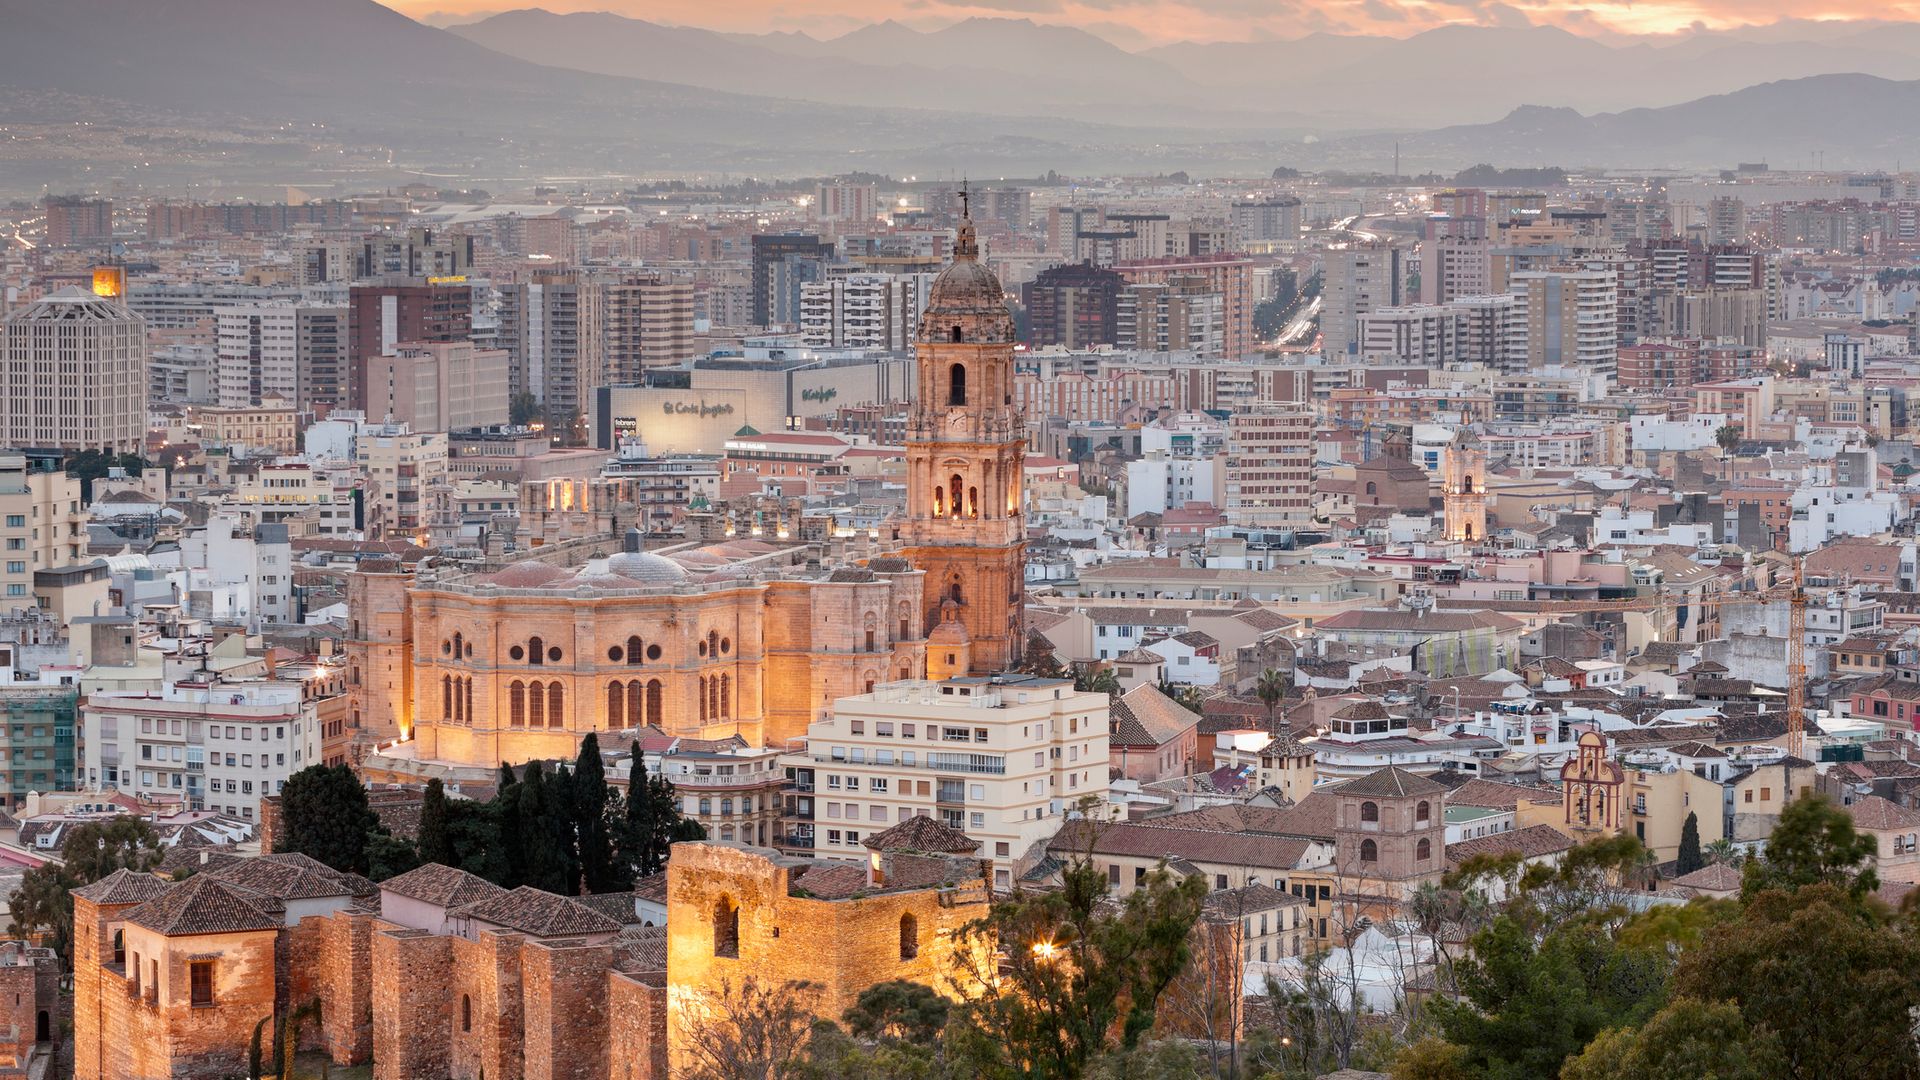 48 hours in Picasso's Málaga hometown: What to do and see